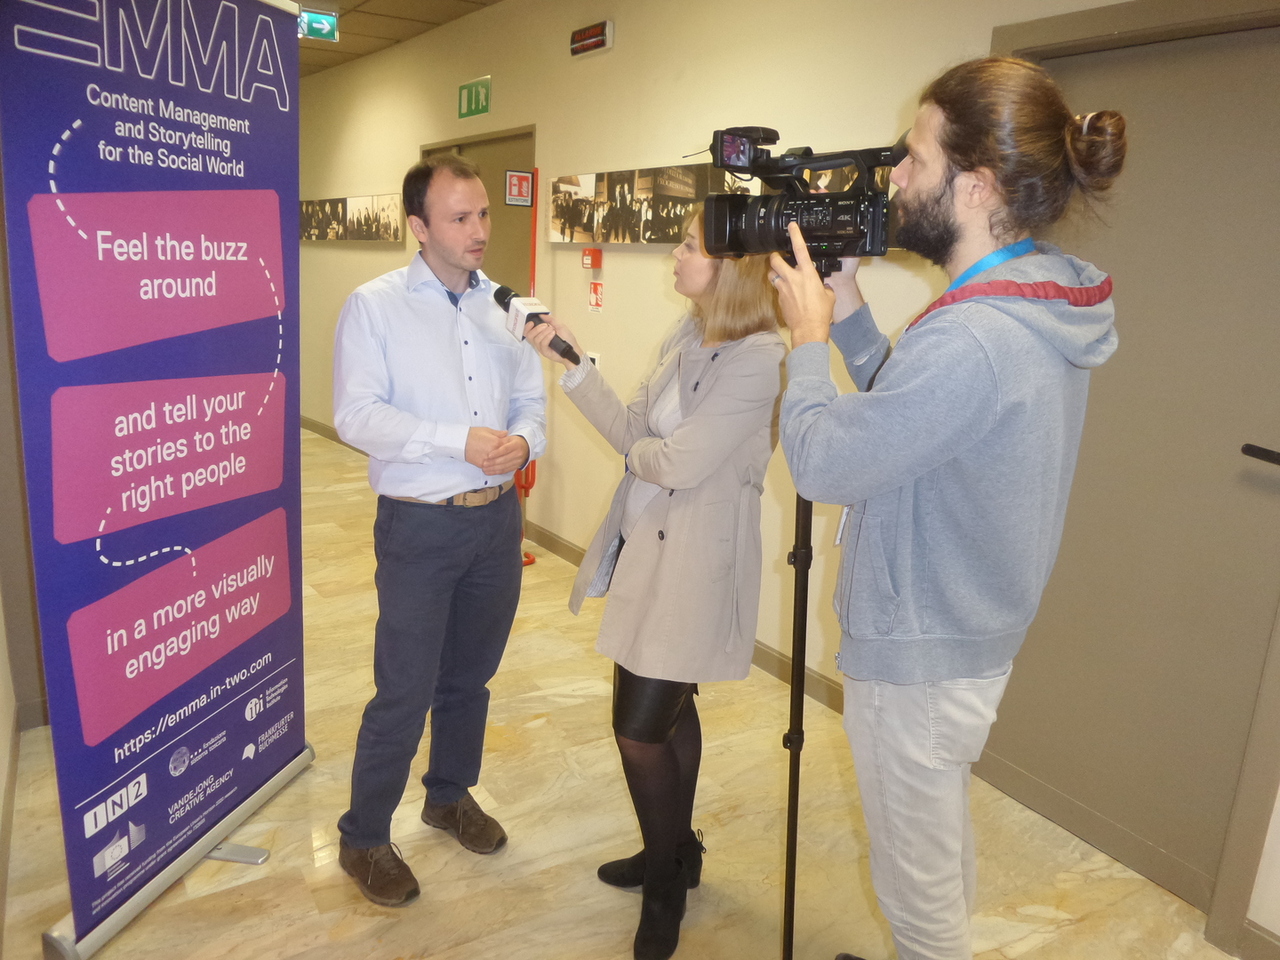 The InToscana channel interviewing Alexandru Stan of IN2 at the Internet Festival 2017